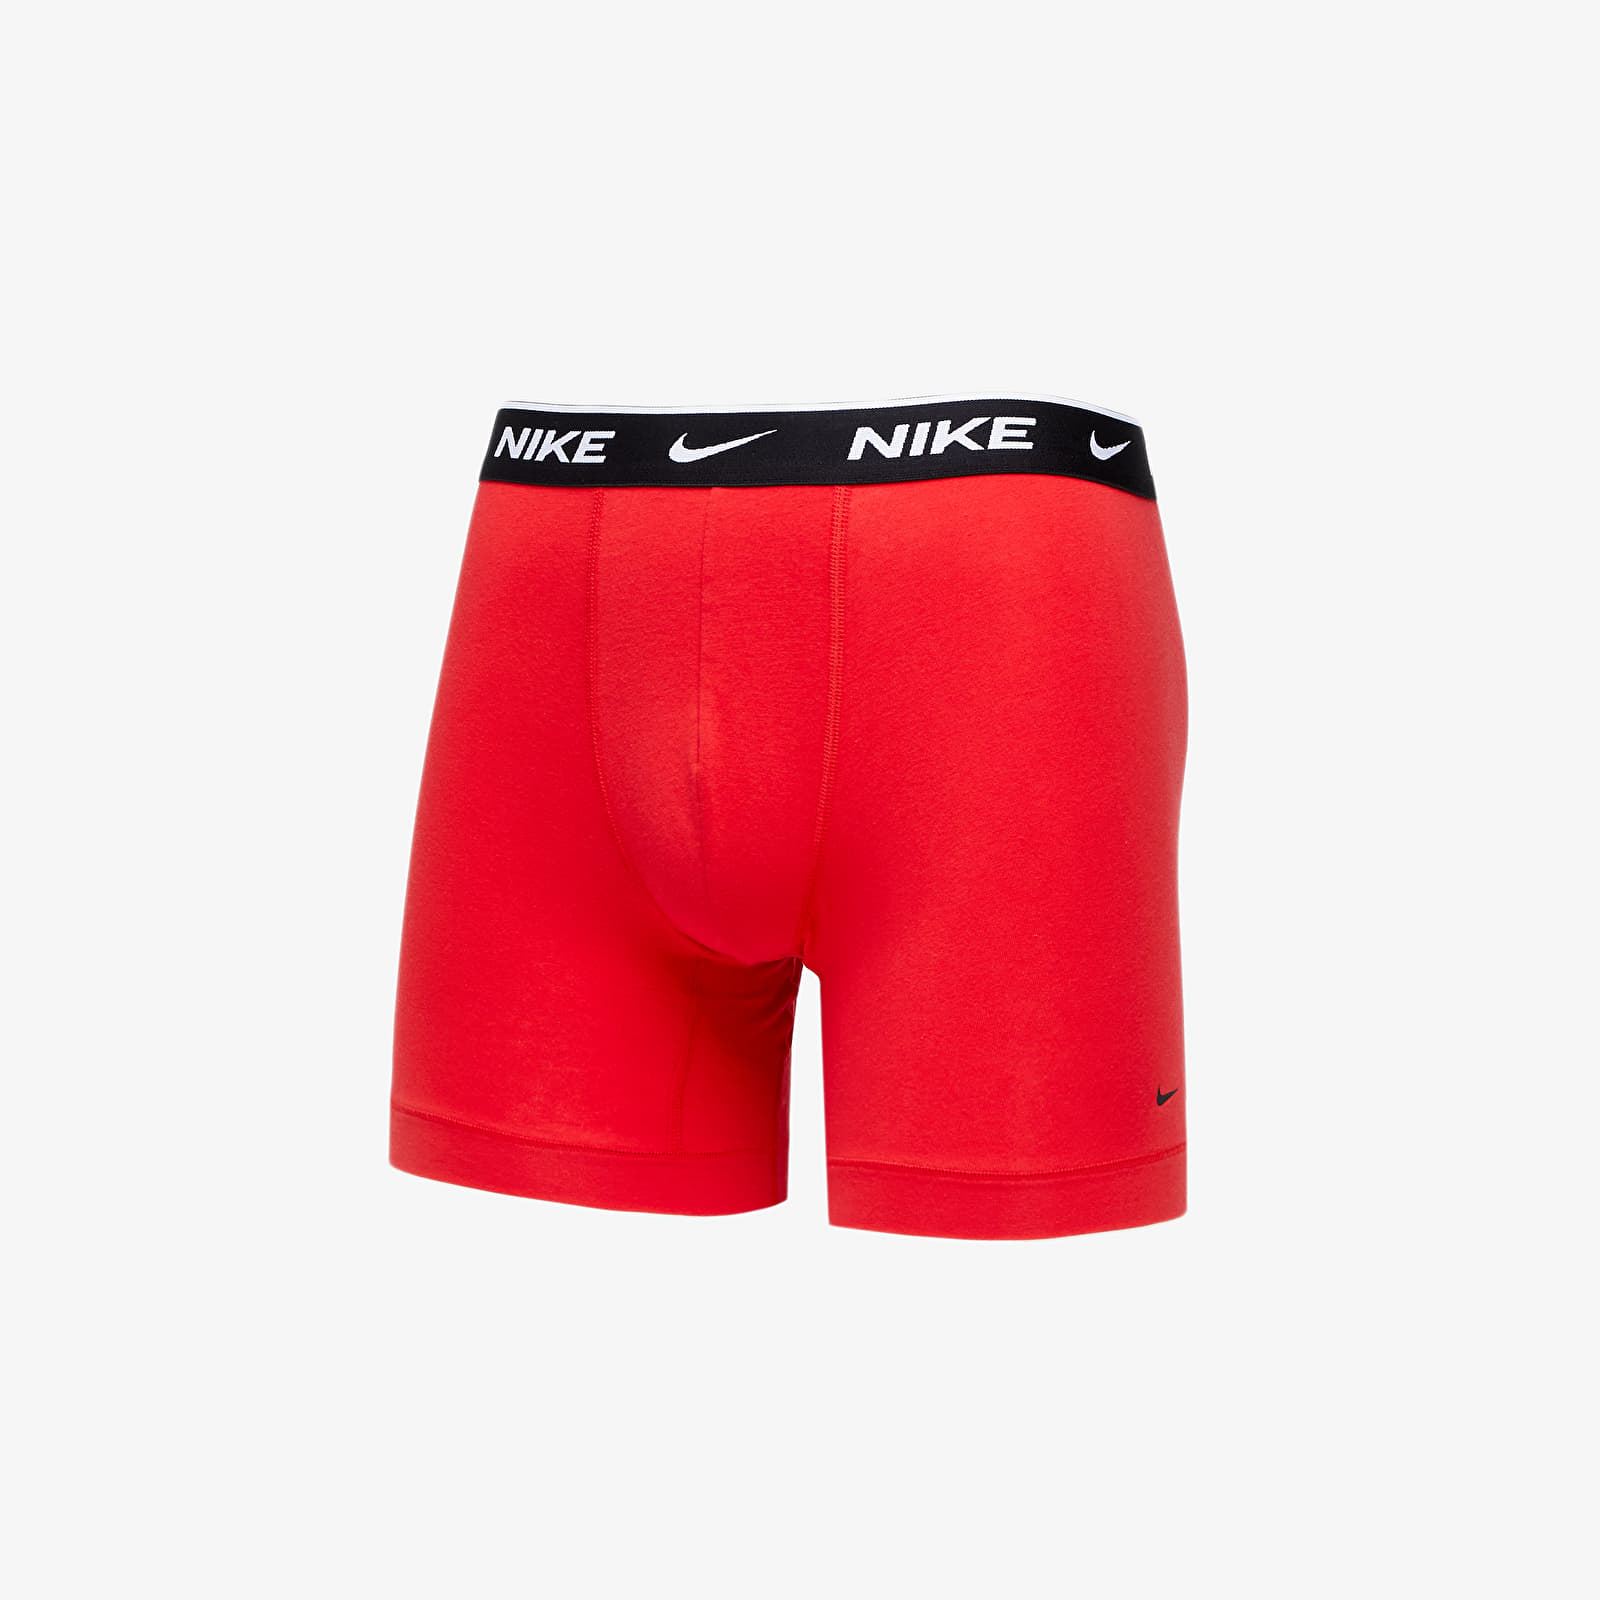 Brief Boxershorts Boxer Nike Obsidian Gold/ Red/ Uni Queens 3-Pack Wheat |